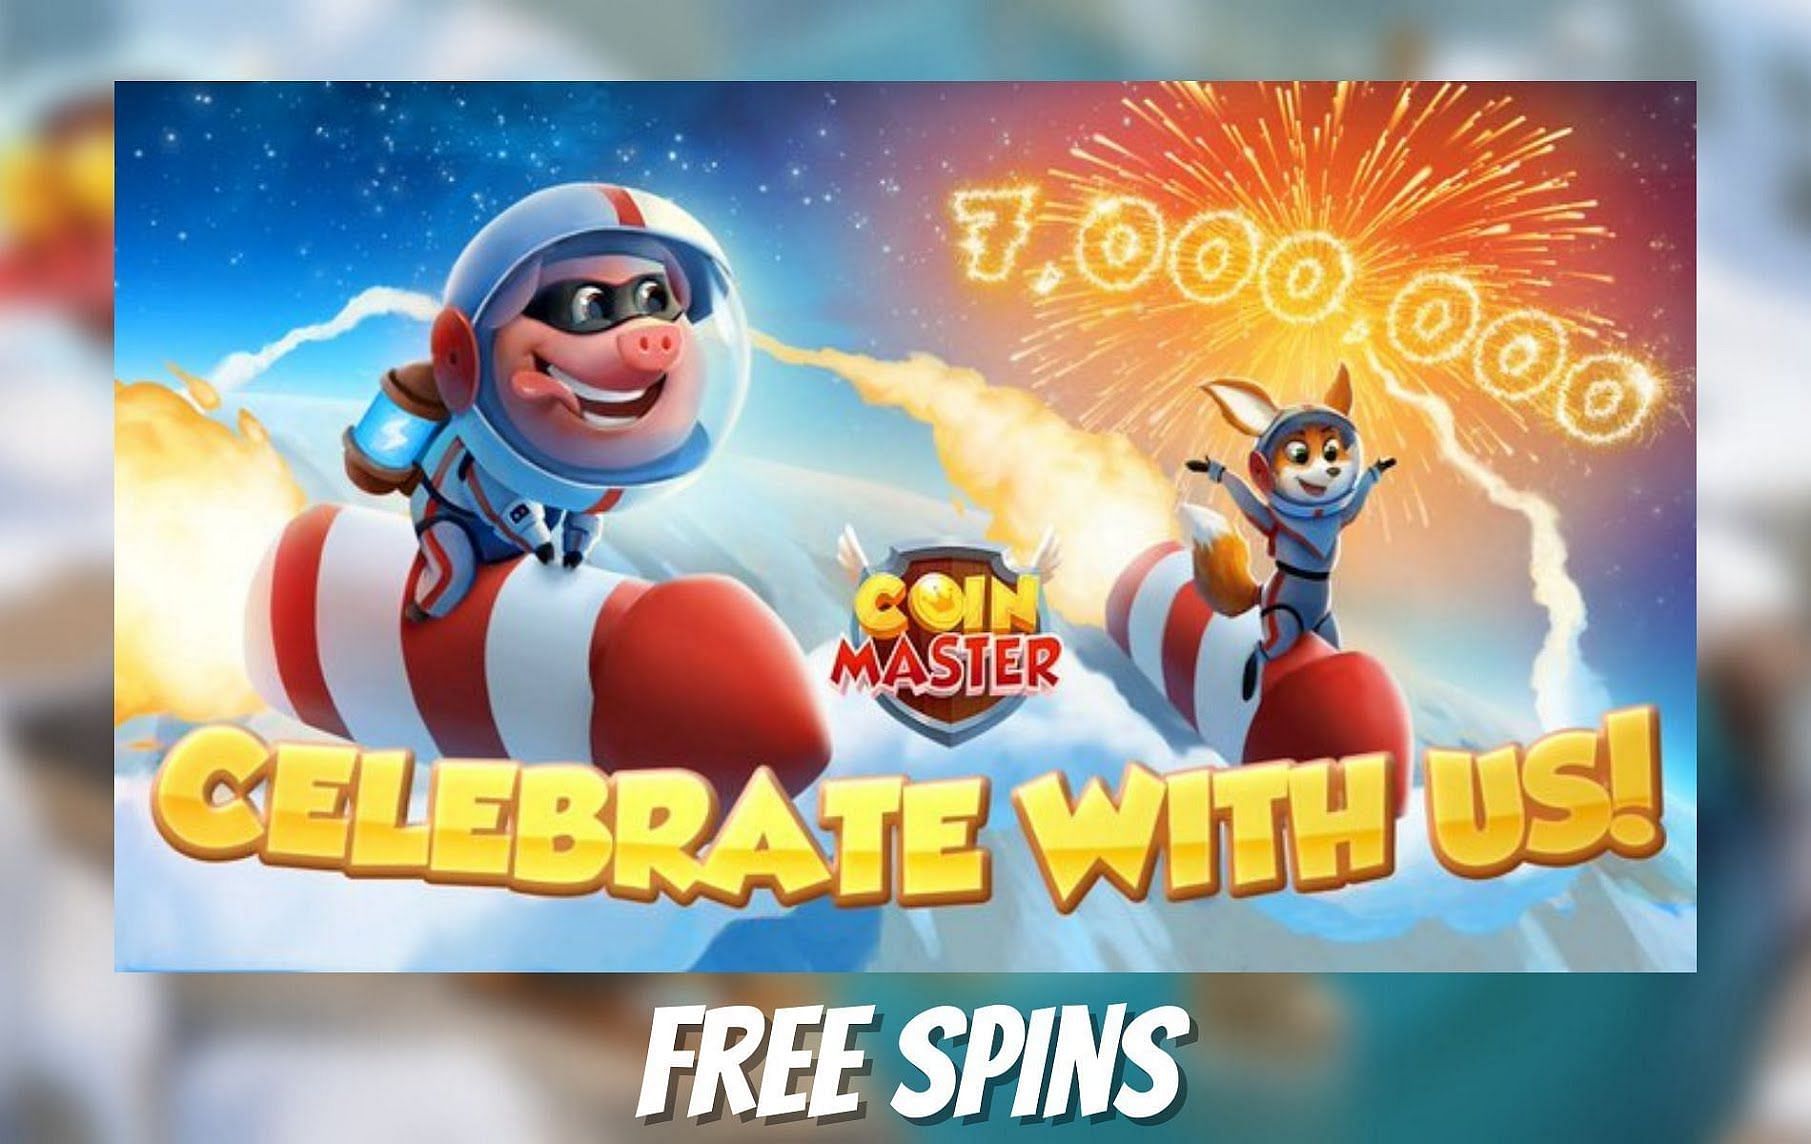 Get free spins by clicking the Coin Master Twitter link (Image via Sportskeeda)